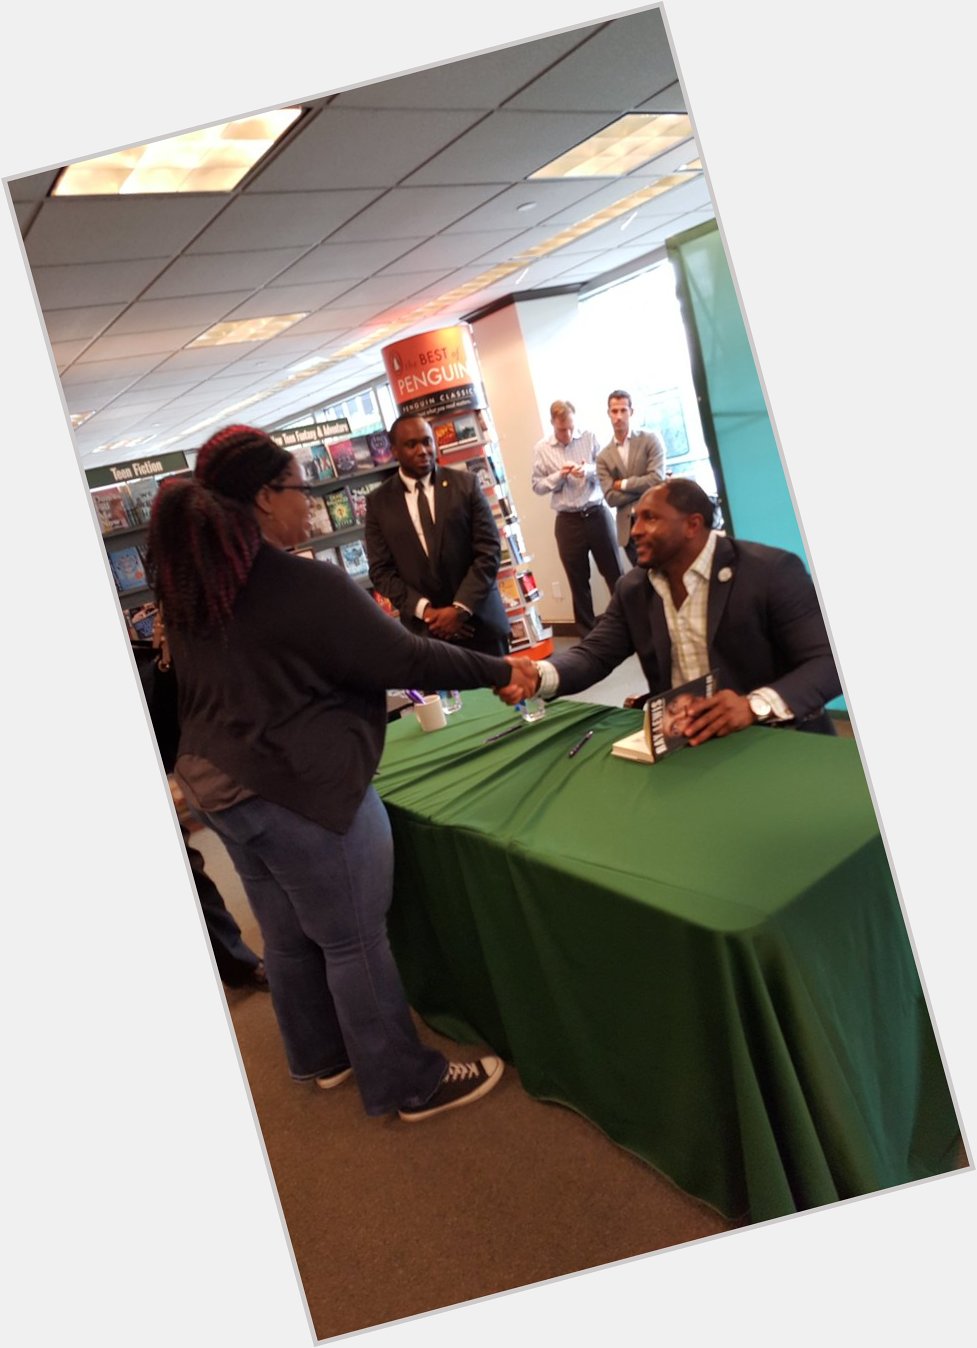 Happy Birthday Ray Lewis! It was such an honor meeting him years ago at a book signing 